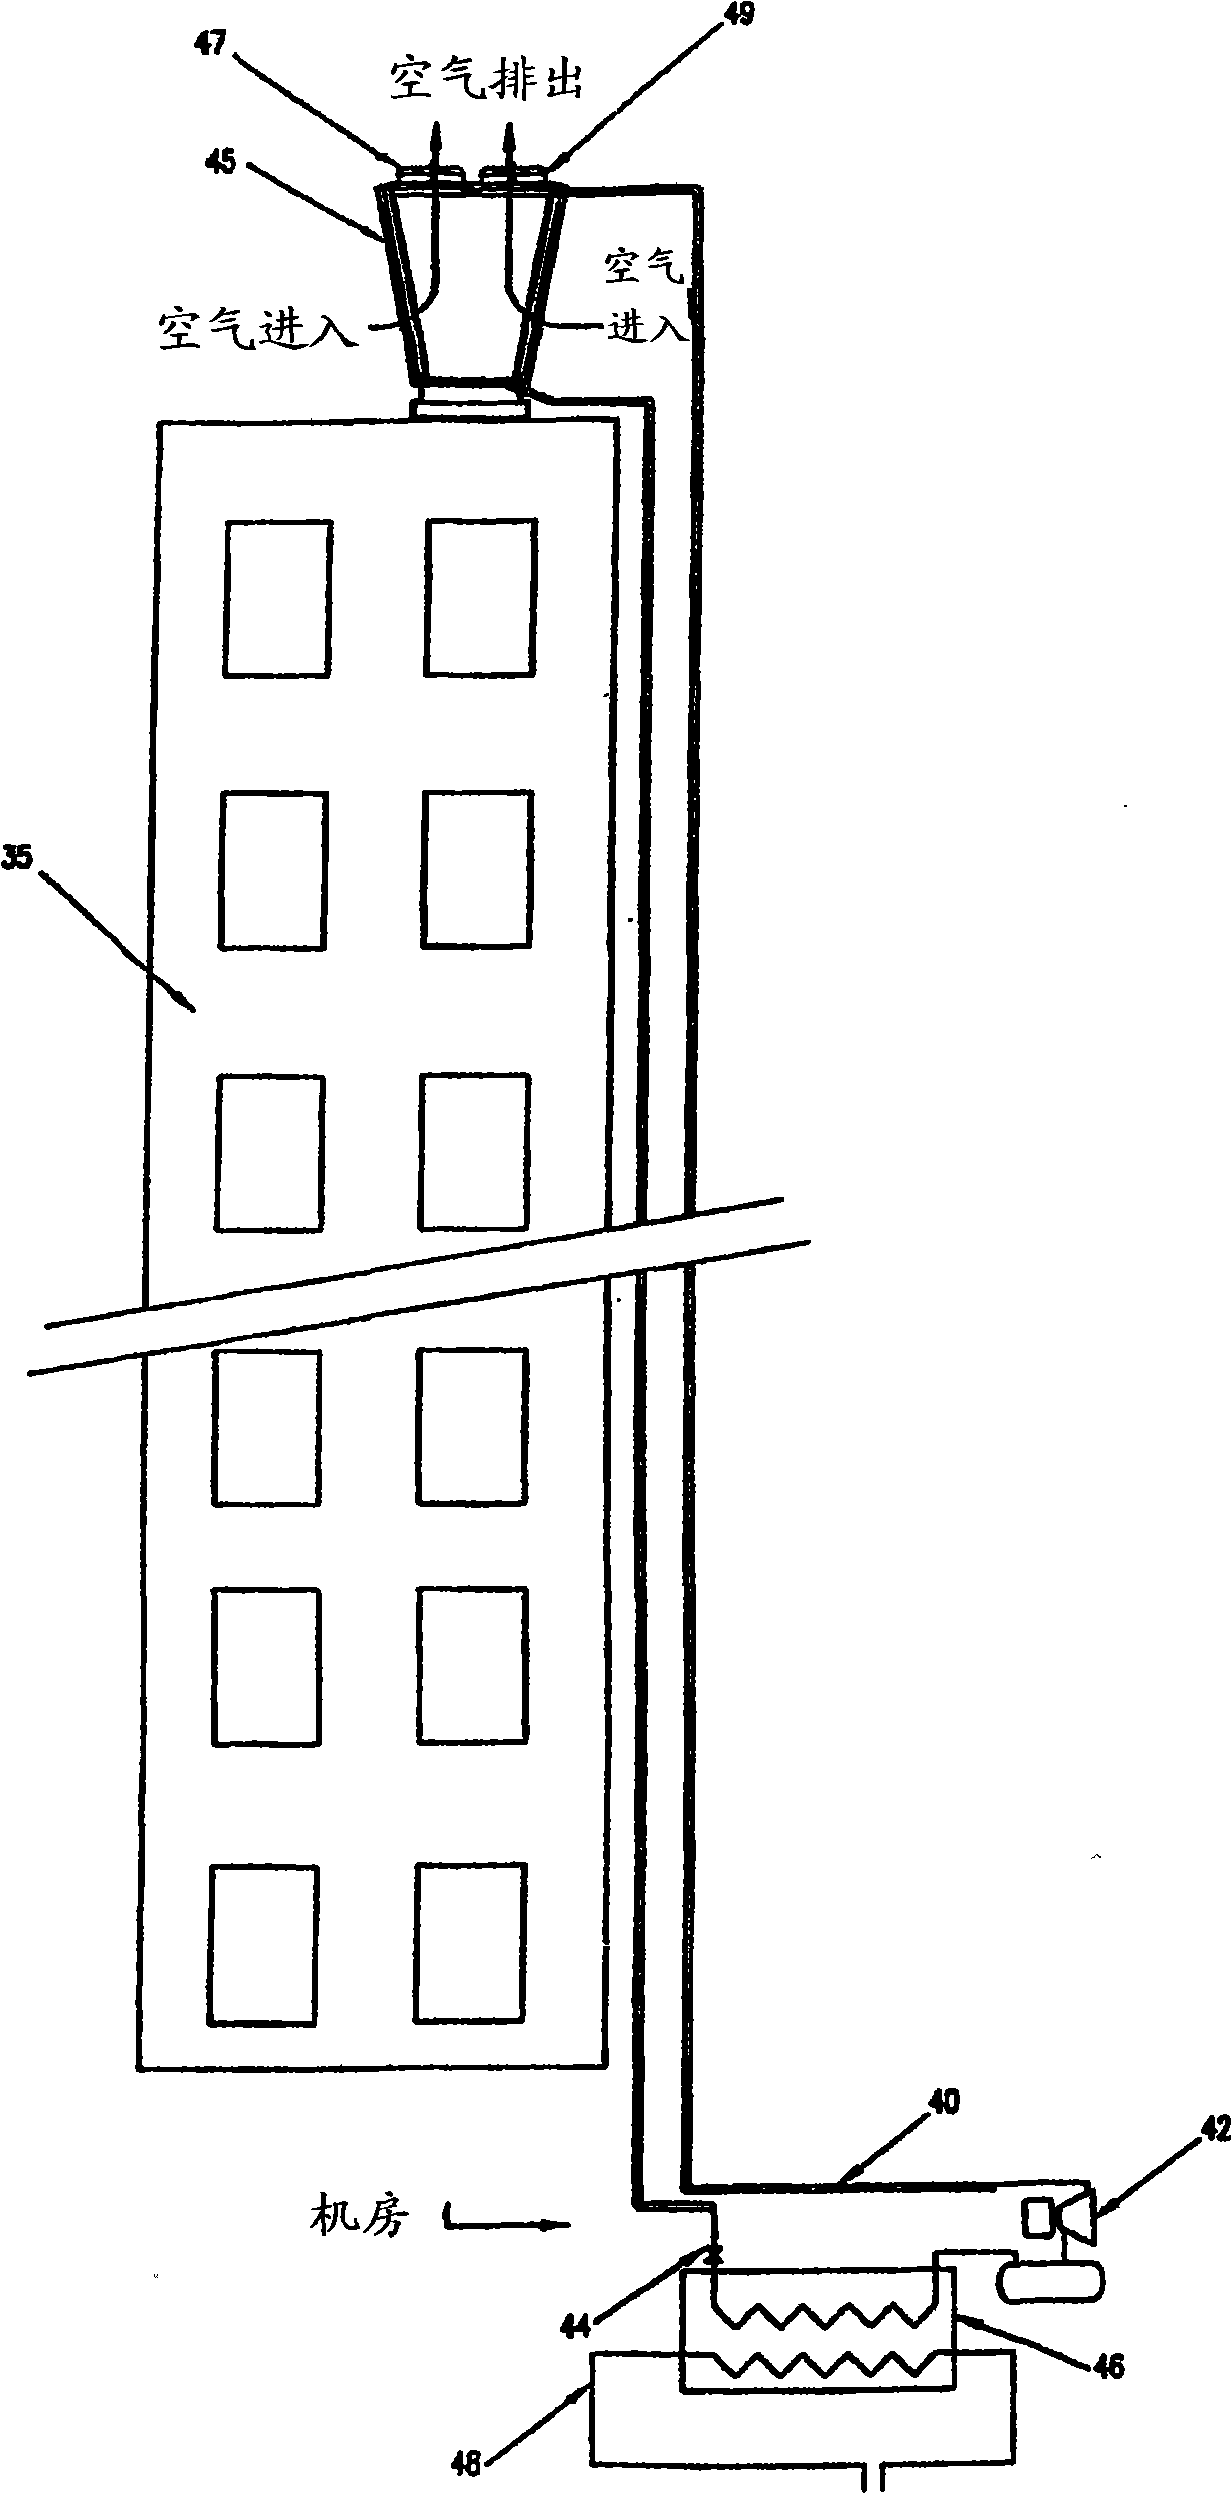 System and method of cooling